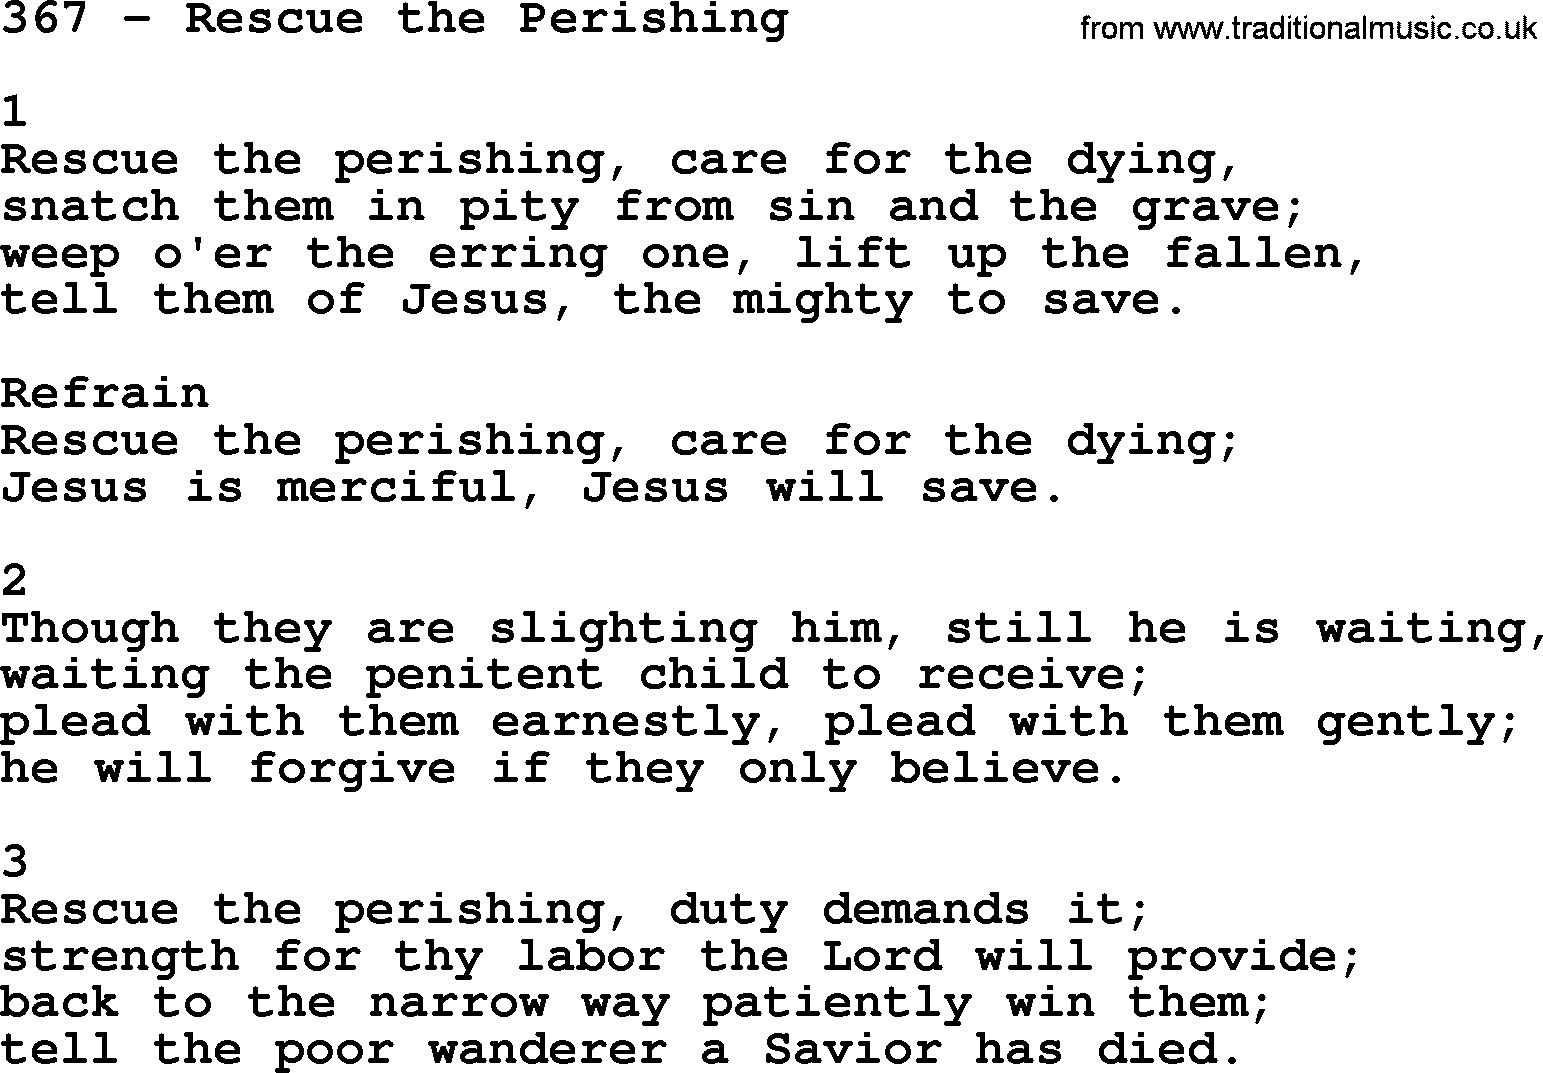 Complete Adventis Hymnal, title: 367-Rescue The Perishing, with lyrics, midi, mp3, powerpoints(PPT) and PDF,